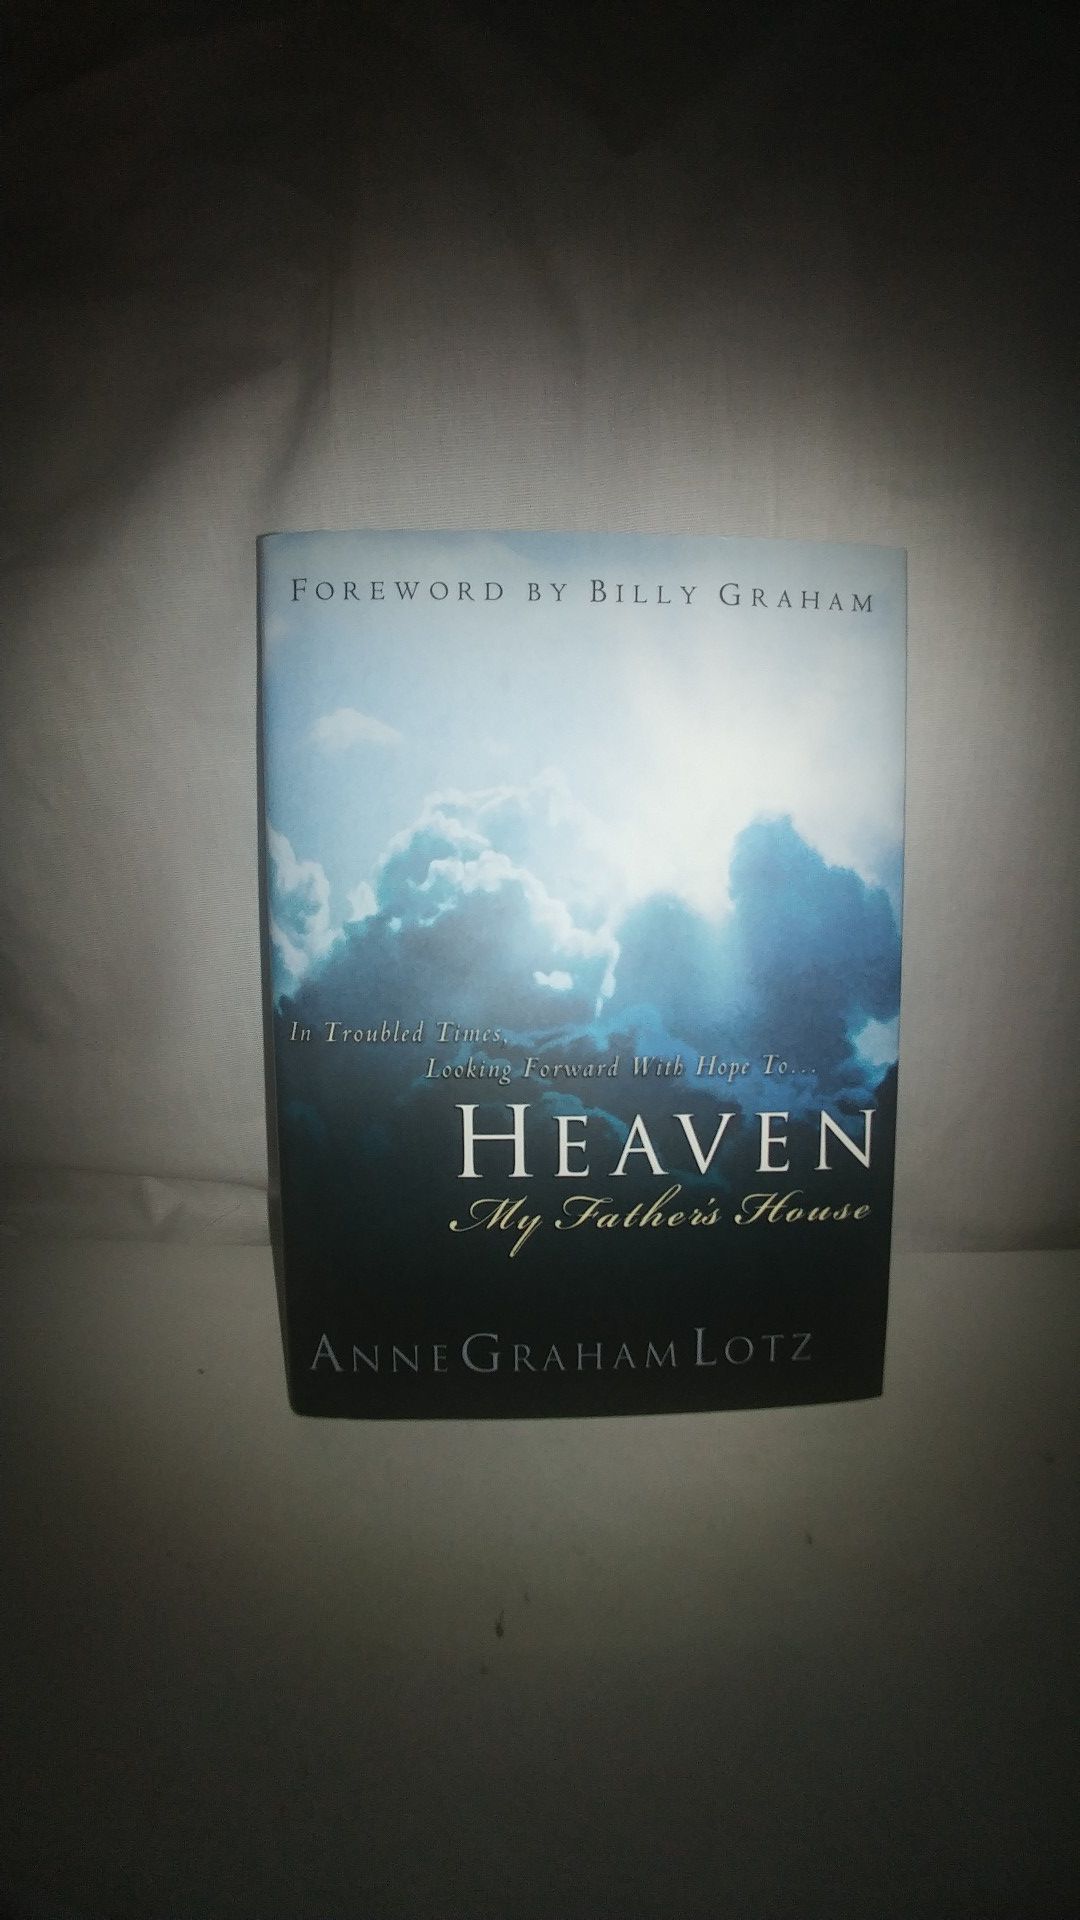 Heaven: My Father's House by Anne Graham Lotz VG